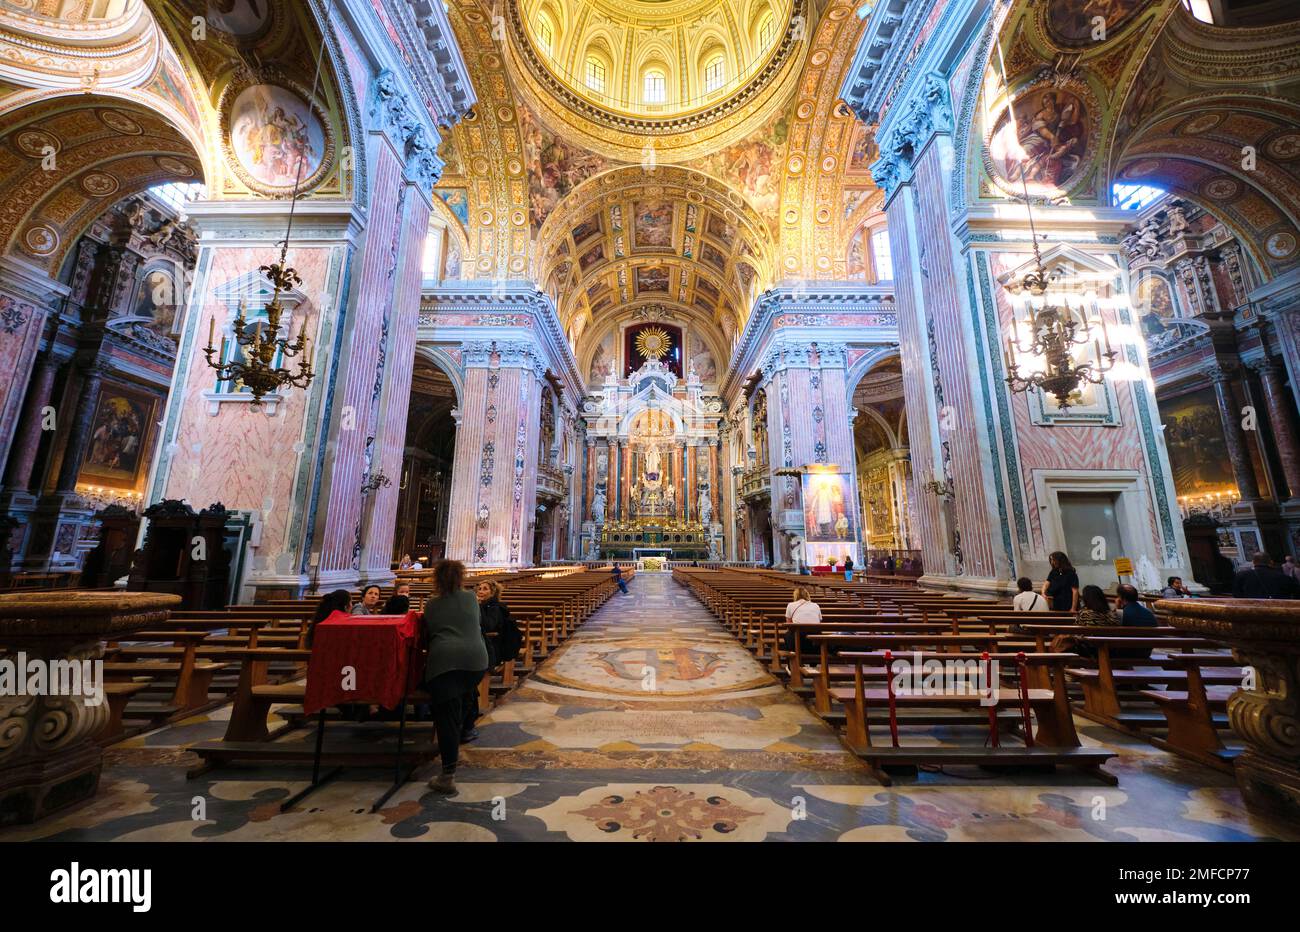 Interior view of the central nave, aisle section with soaring, gold, double vault ceiling and dome. At the Chiesa del Gesù Nuovo Catholic church in Na Stock Photo